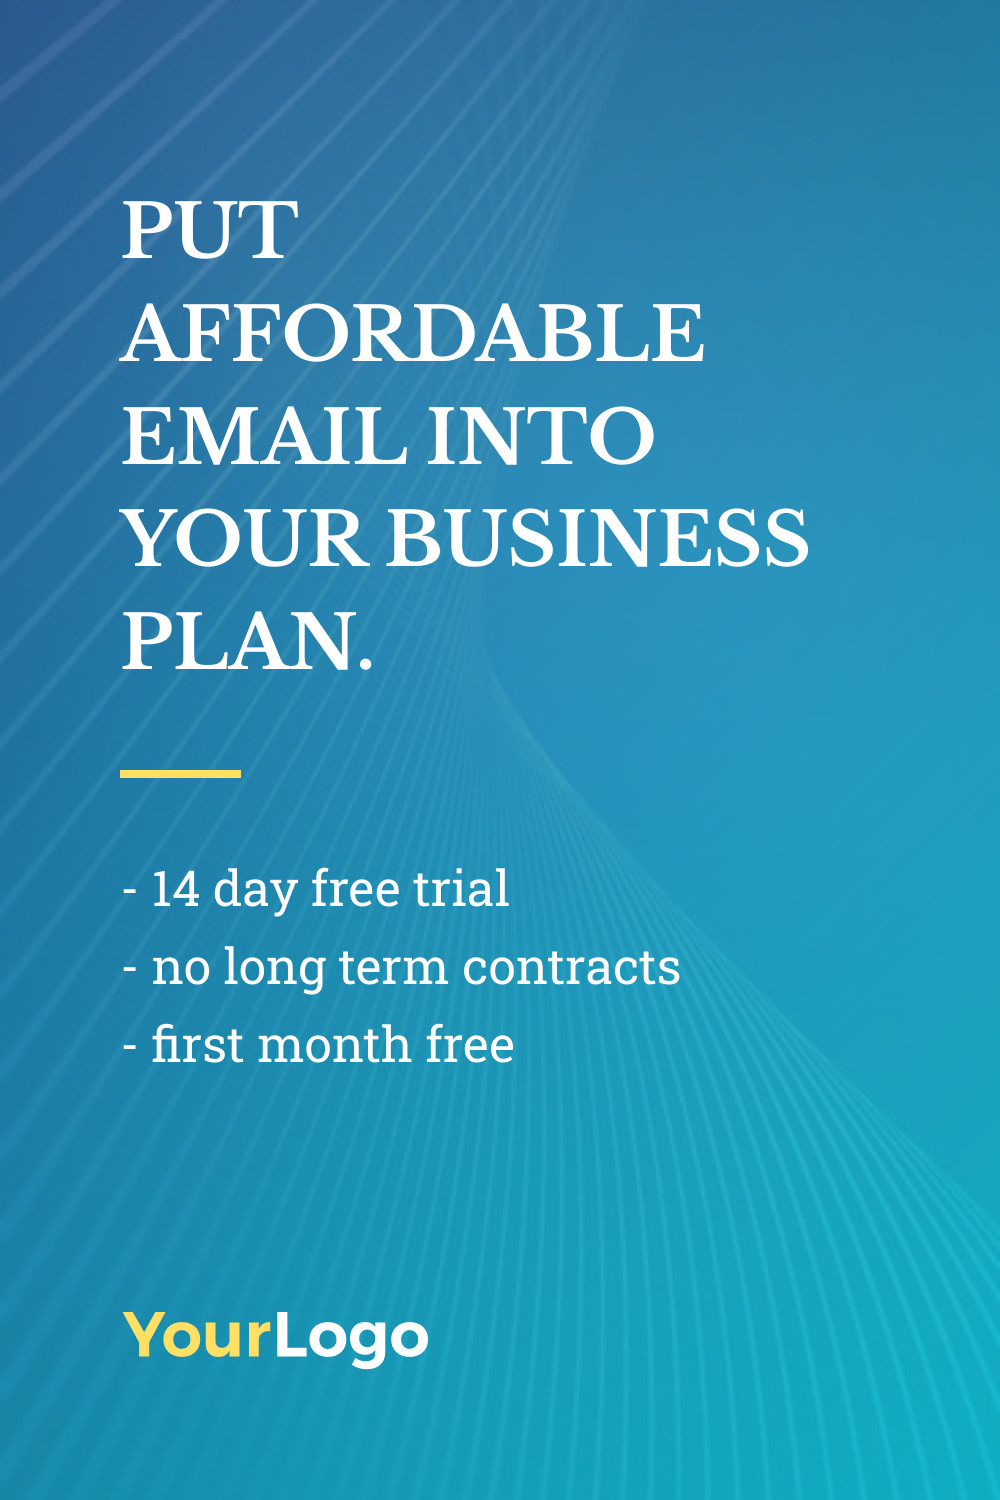 Affordable Email Business Plan Inline Rectangle 300x250